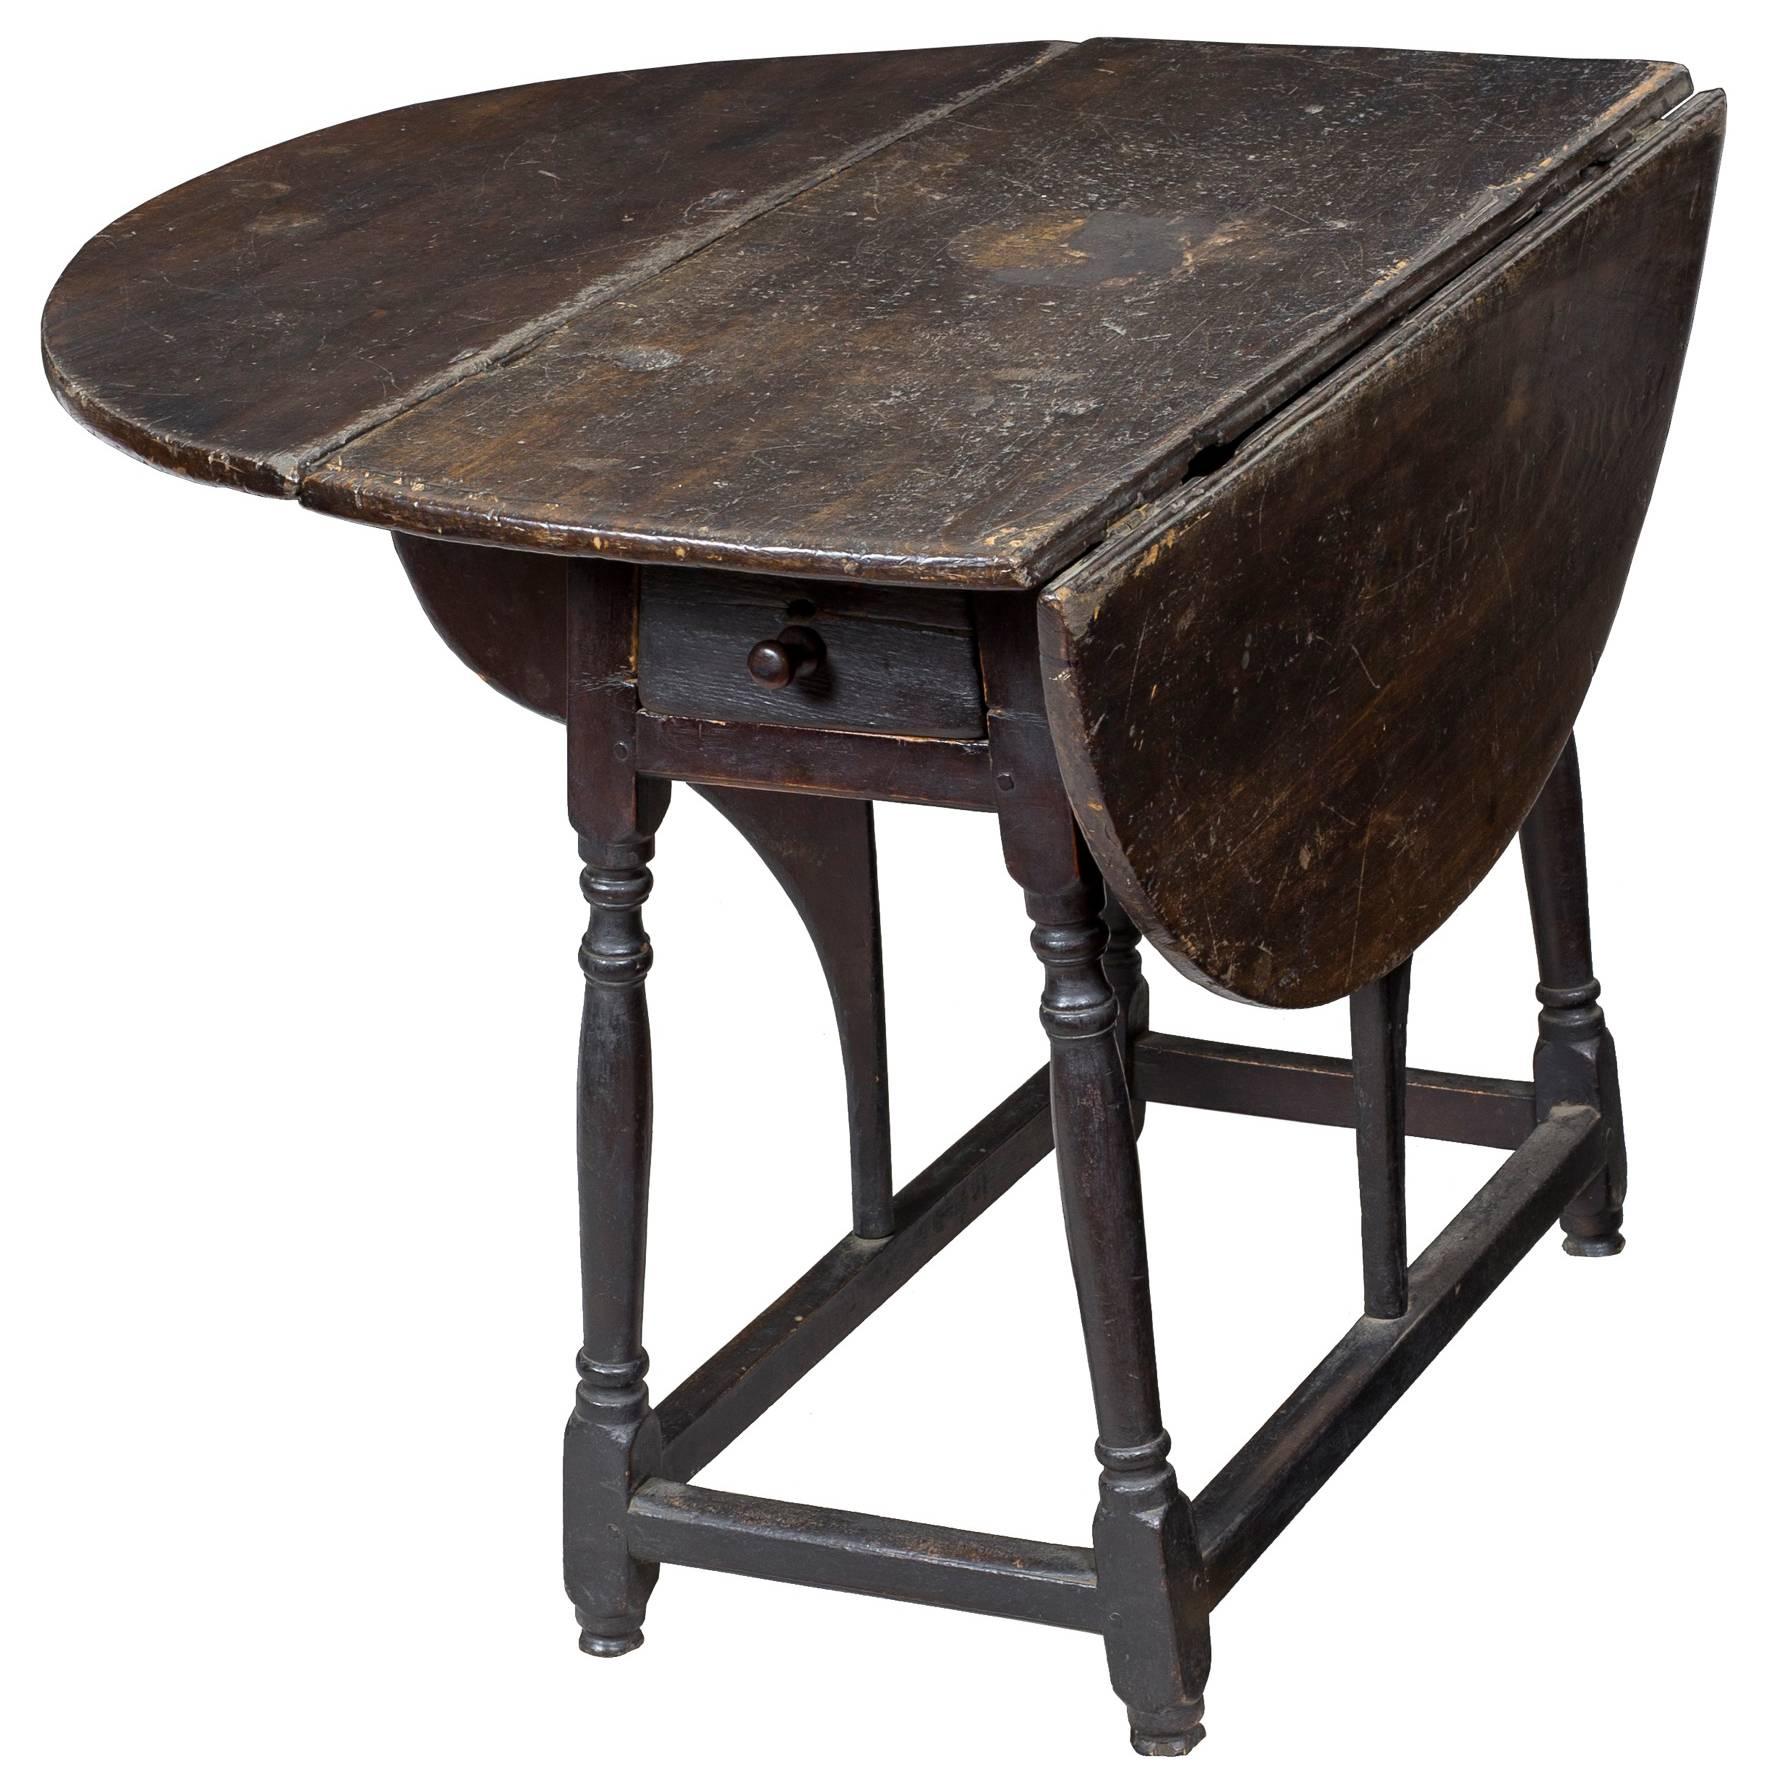 Rare Tulip Poplar Butterfly Table in Original Surface, New York, circa 1730 For Sale